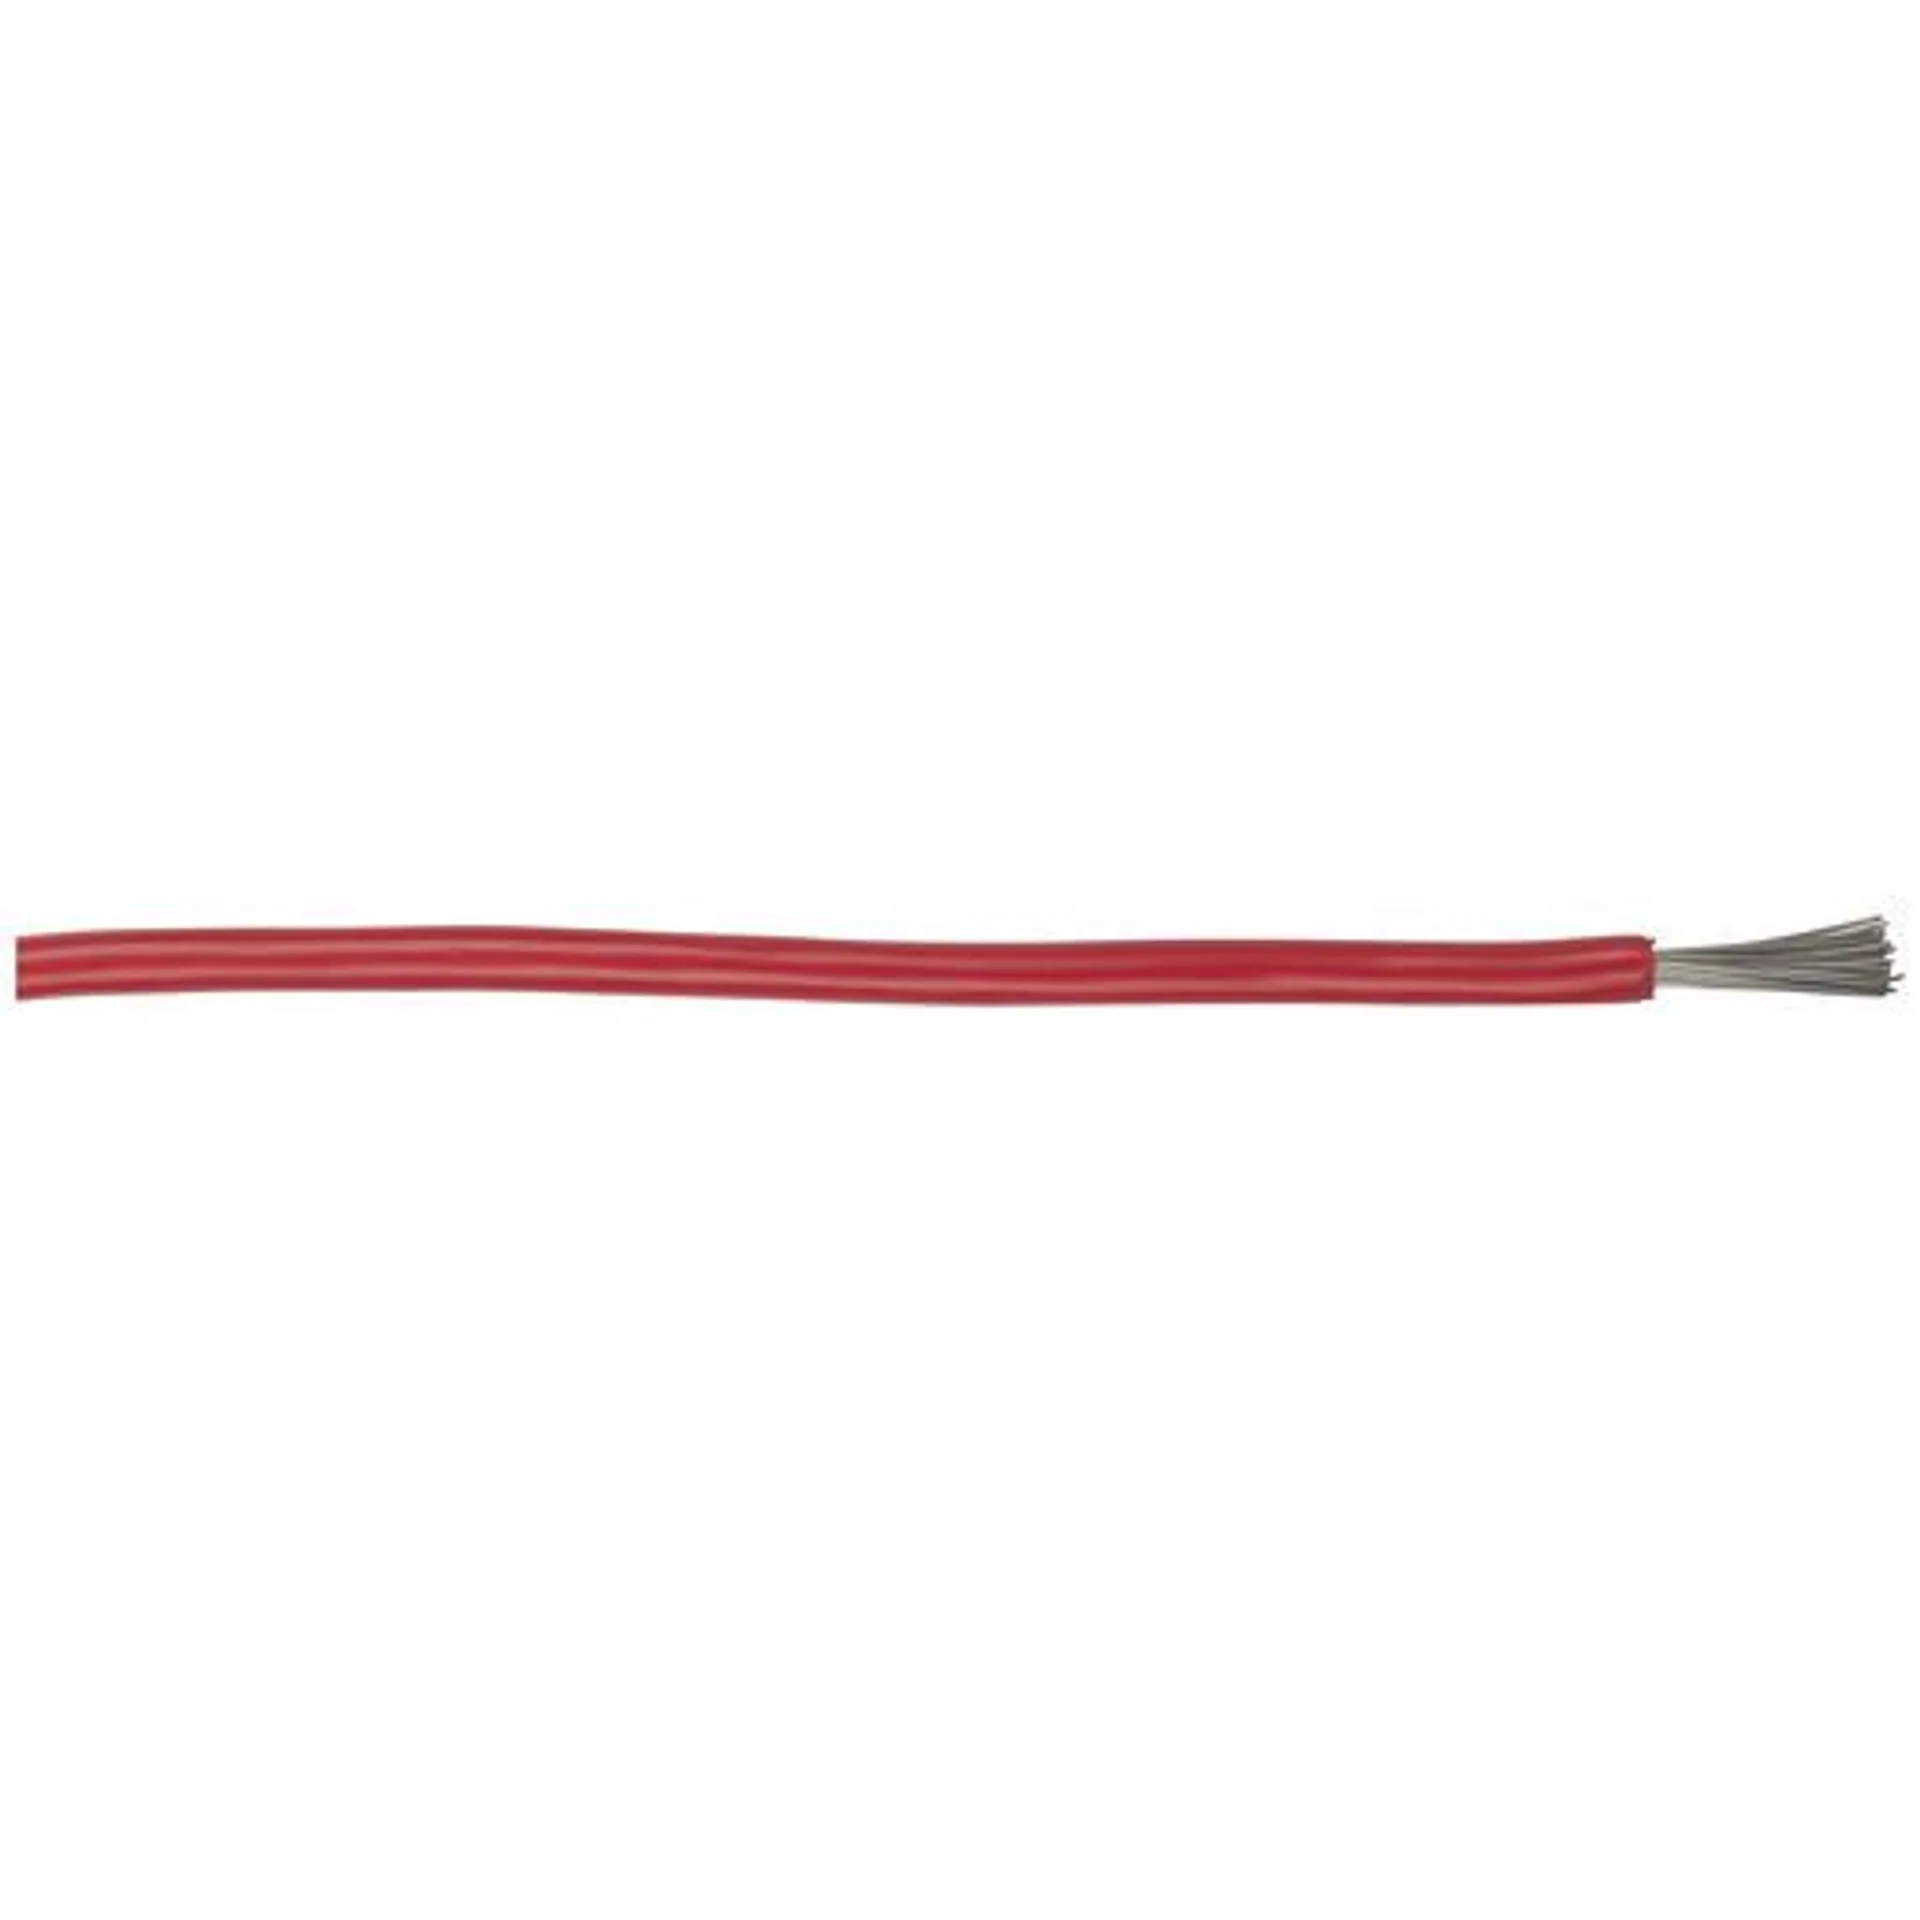 Red 15 Amp DC Power Cable - Sold per metre